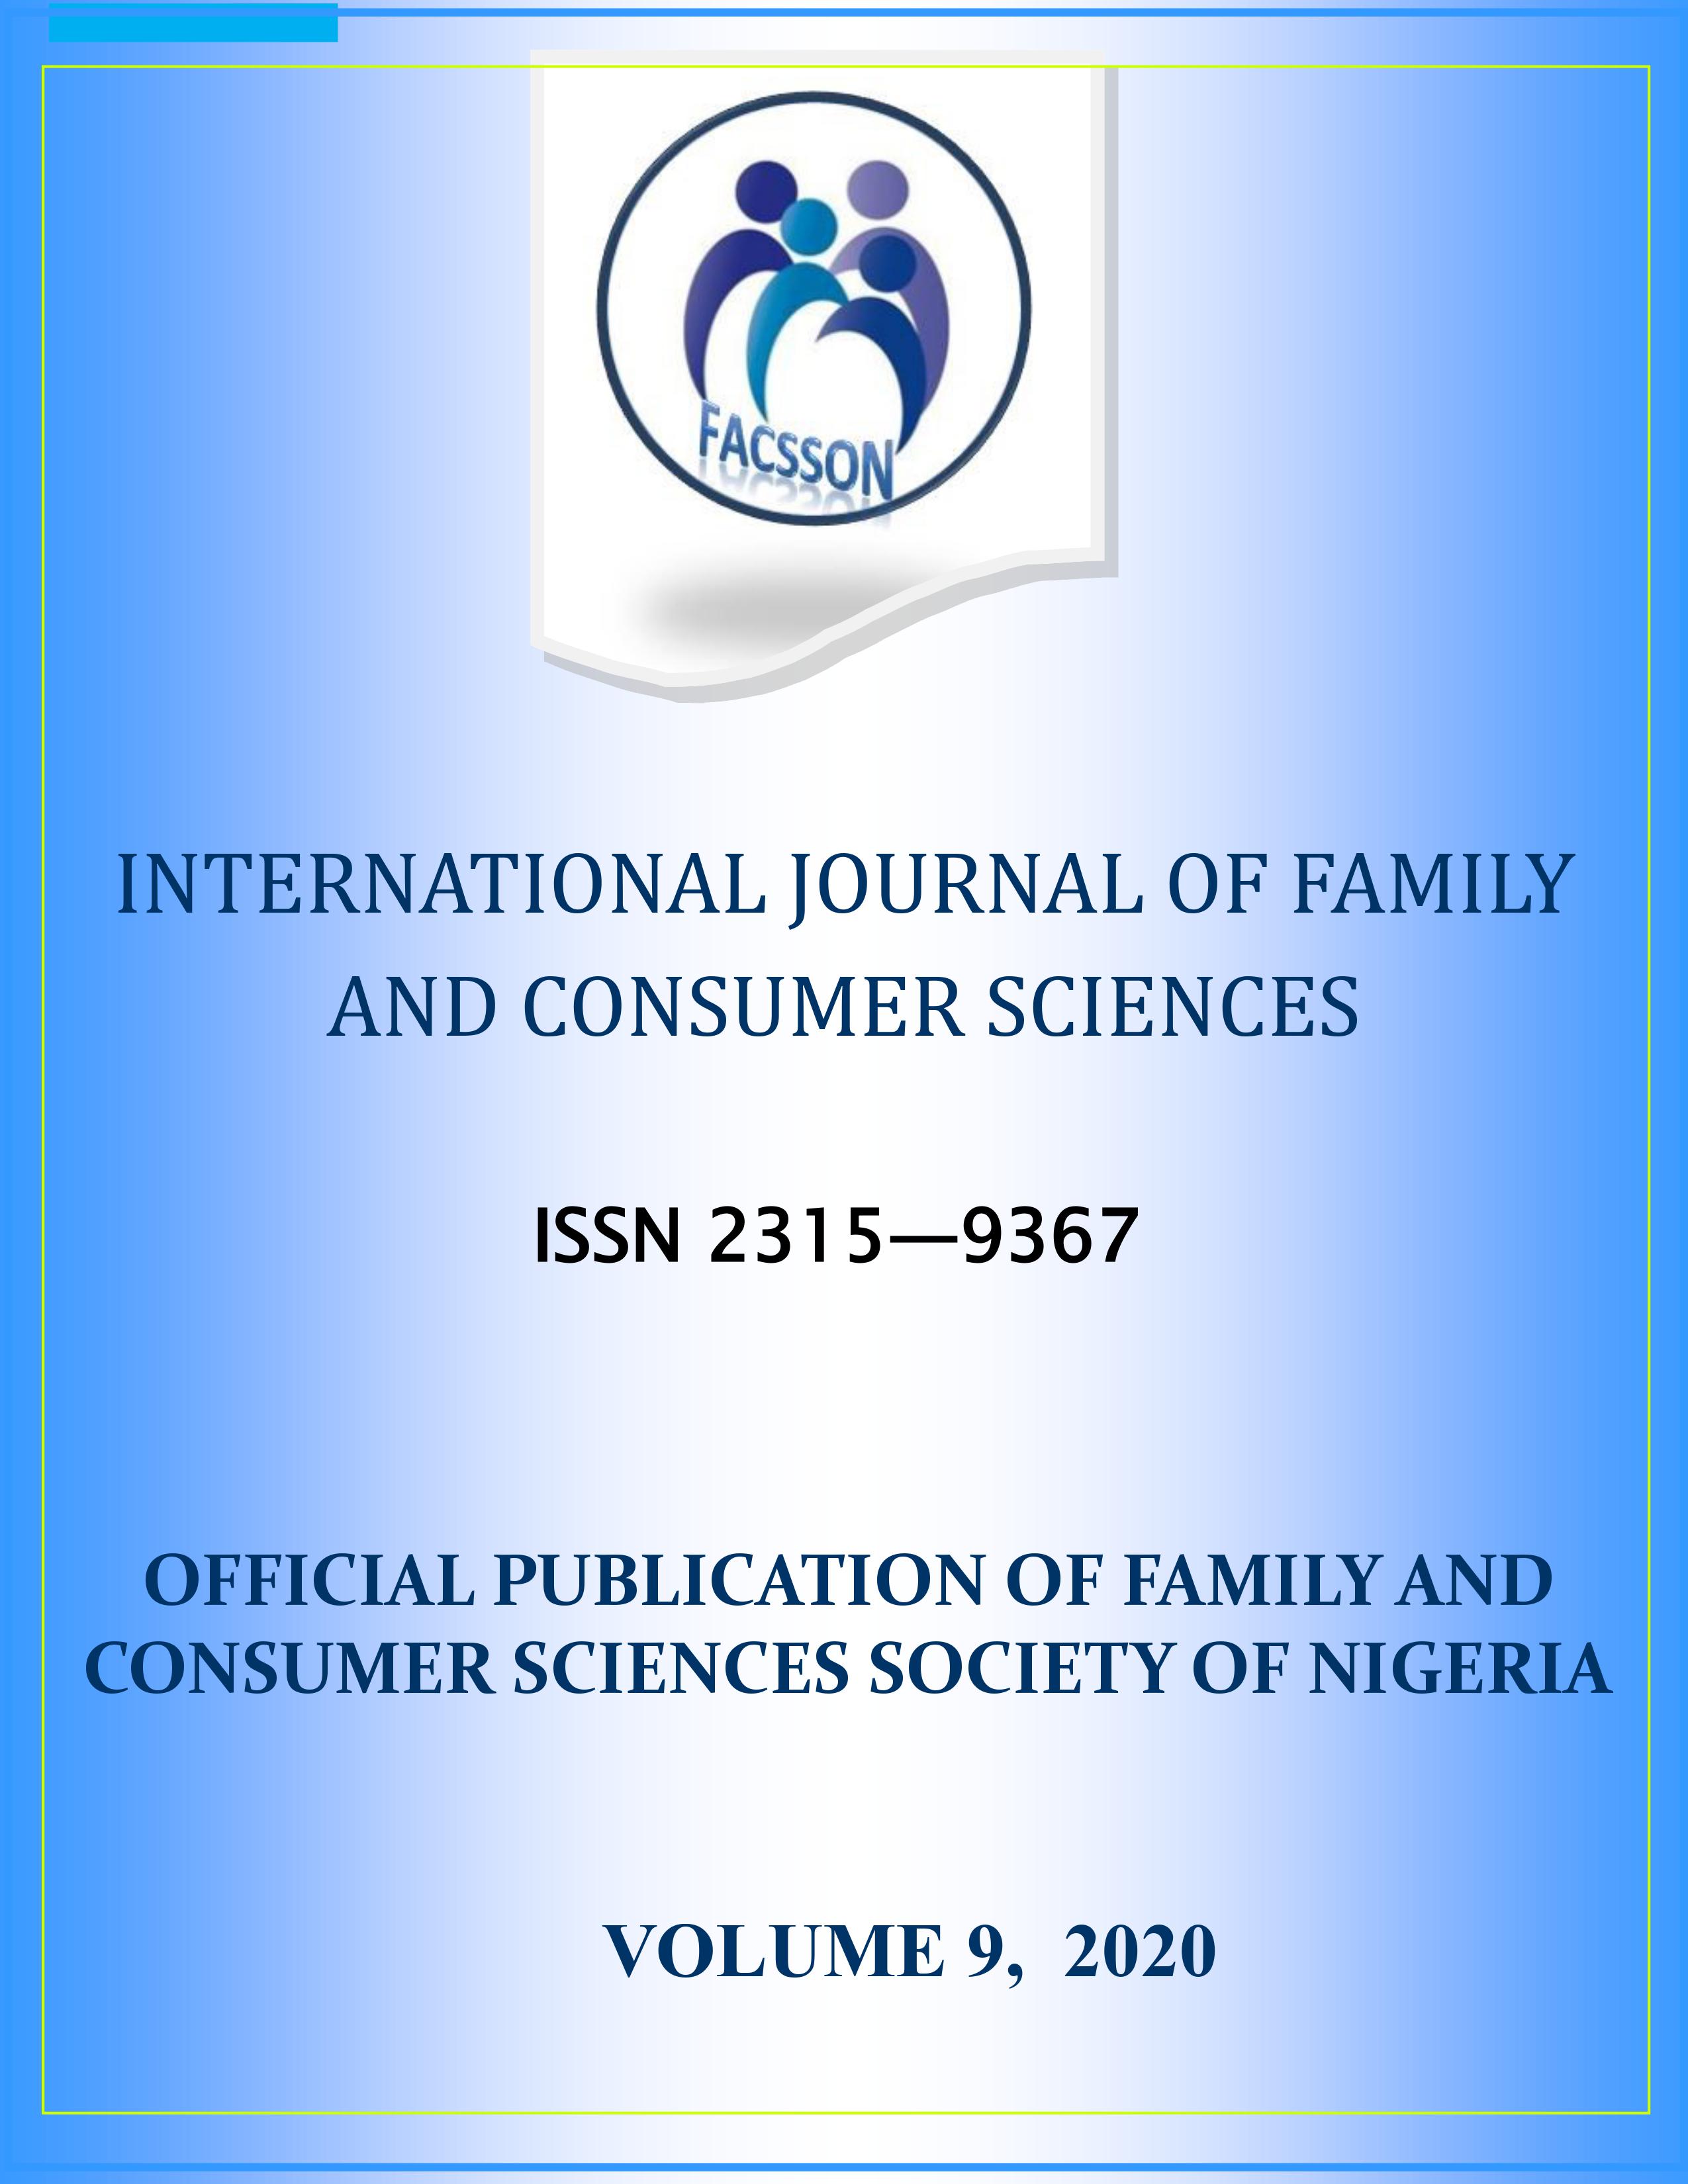 					View Vol. 9 (2020): International Journal of Family and Consumer Sciences
				